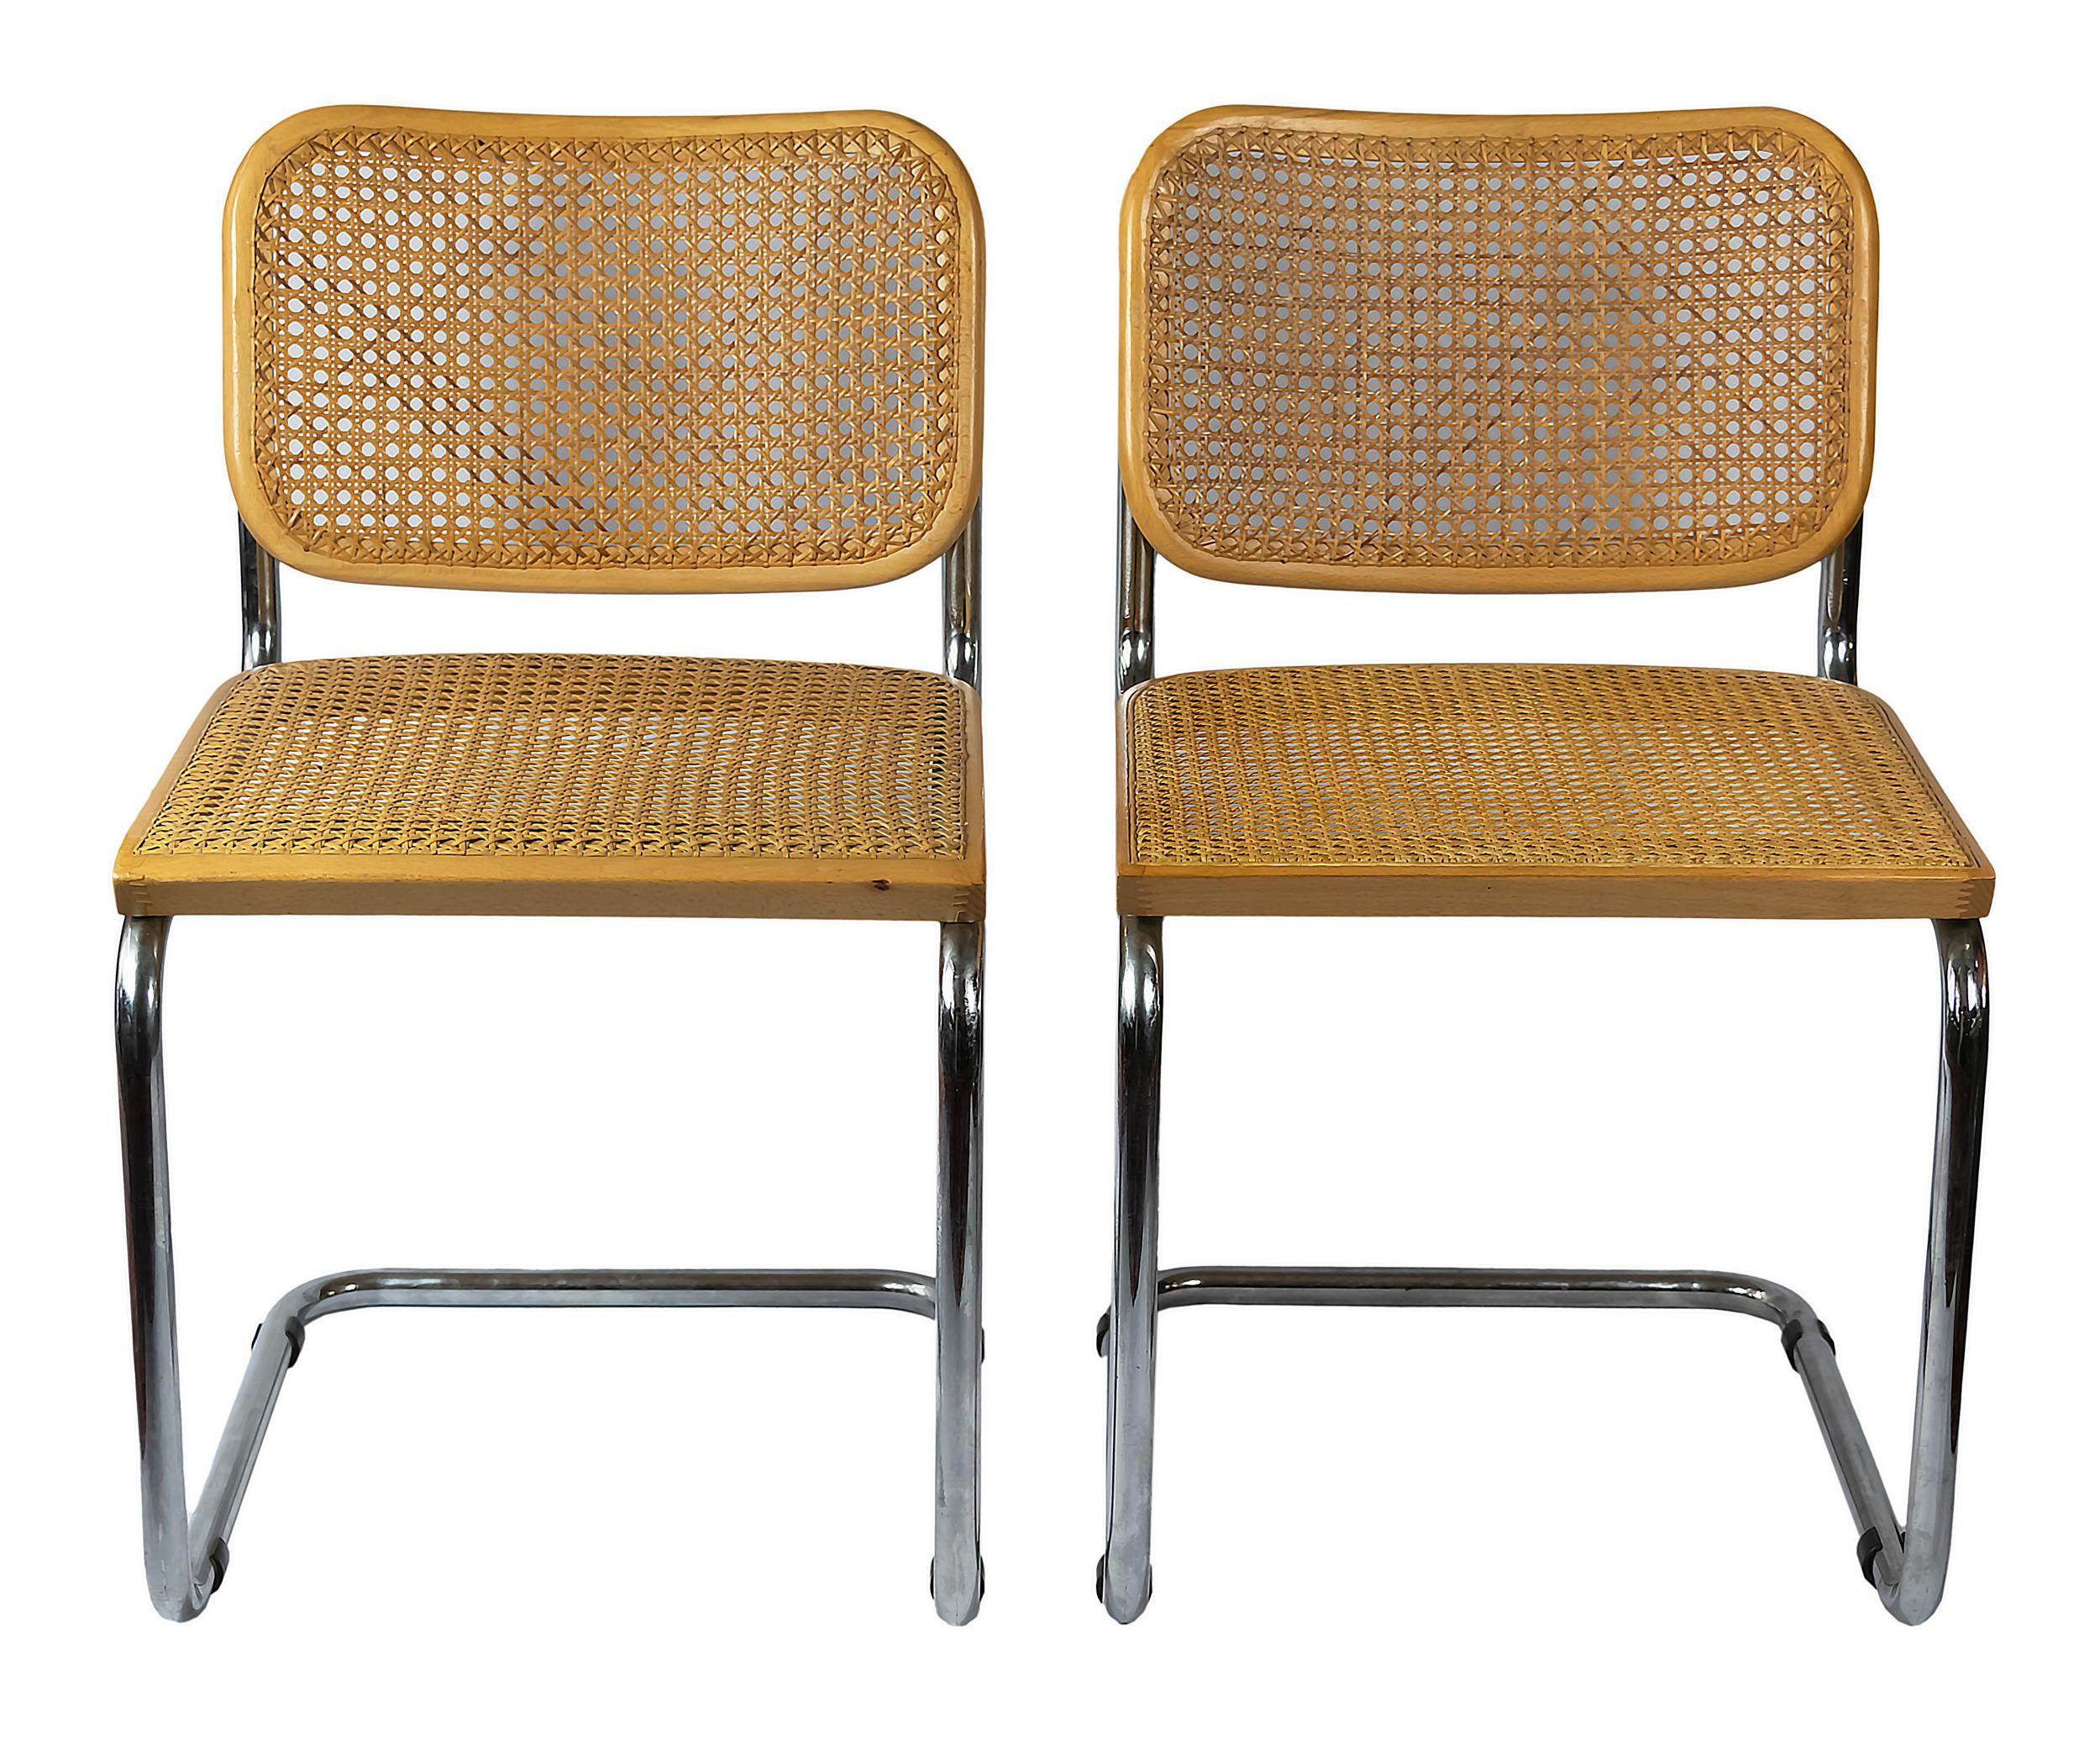 Set of 6 pieces of Cesca chairs designed by Marcel Breuer in 1928's. These chairs are created in tubular chrome and woven cane rattan seat and backing.
Very good vintage condition.